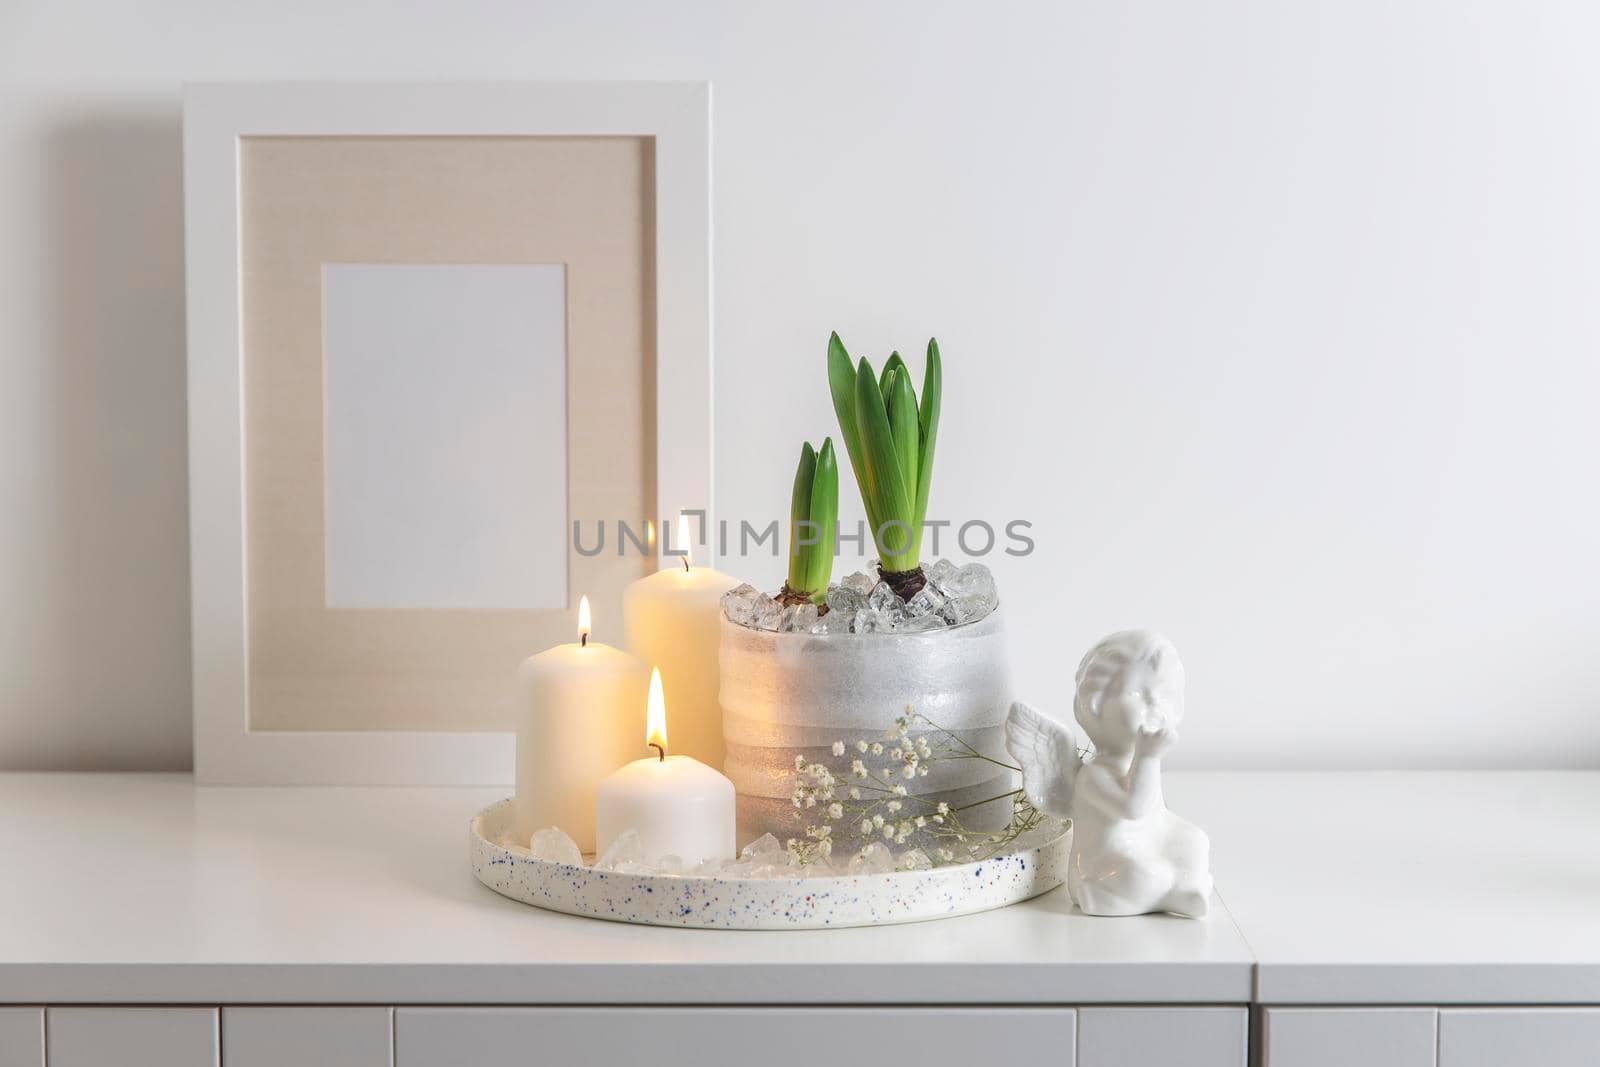 Unblown hyacinths with burning candles on a wooden vintage tray. Home decoration for spring